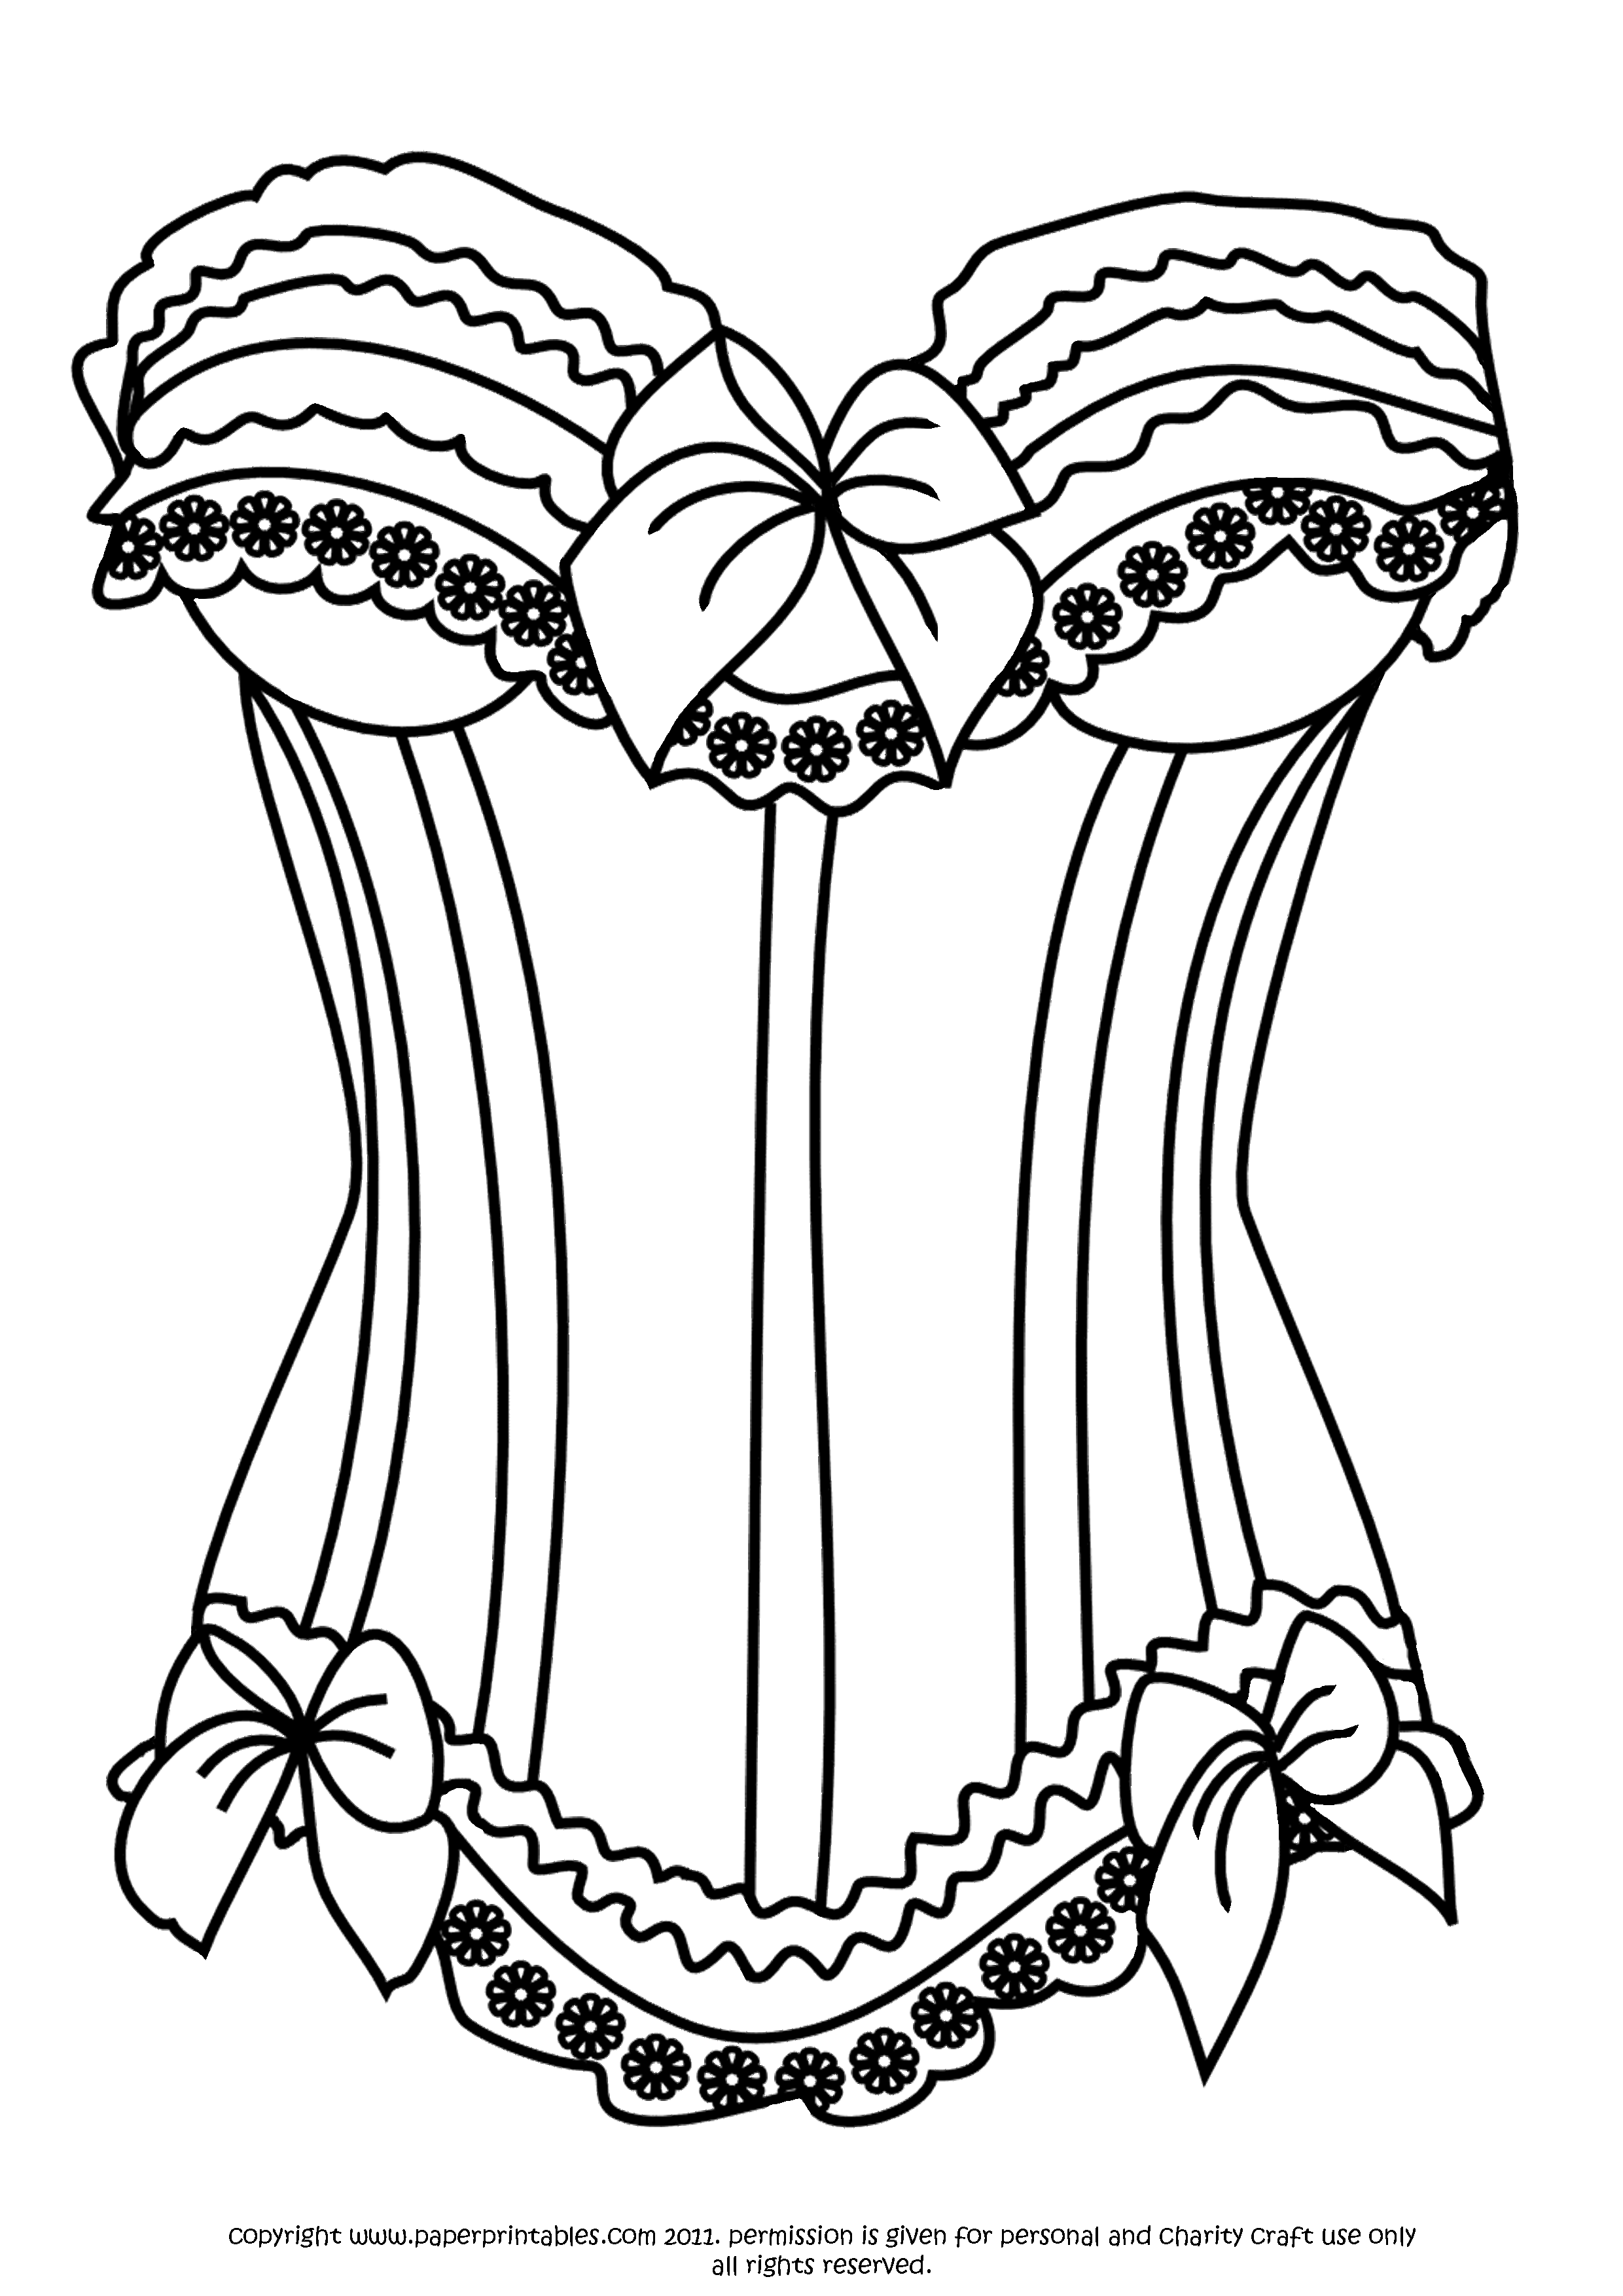 black and white coloring pages for adults pin by mary barnes ekobena on assorted black white for pages coloring black white and adults 